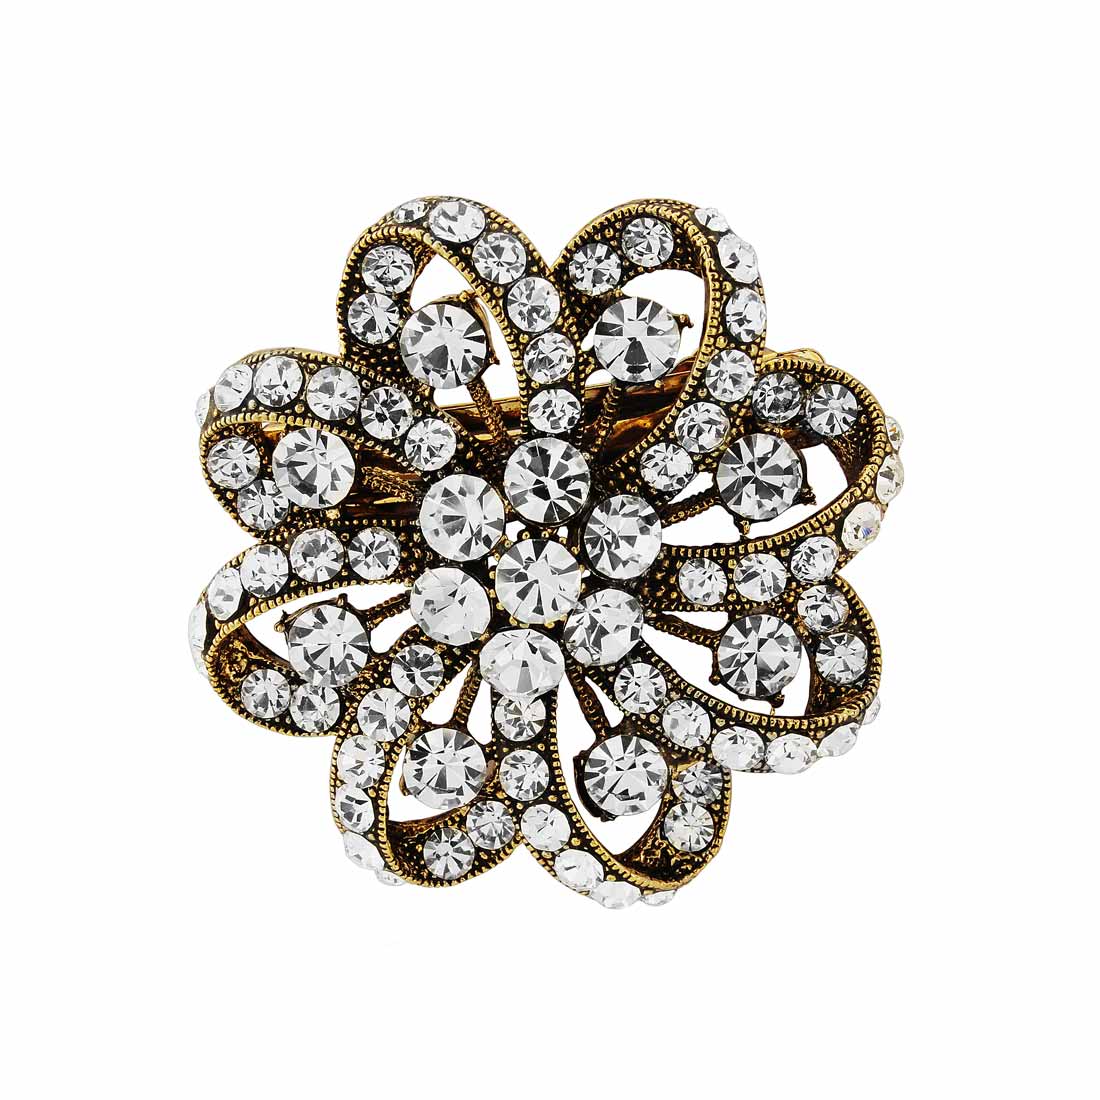 Elegance of Gold Vintage Hair Clip for Weddings, Proms & Occasions